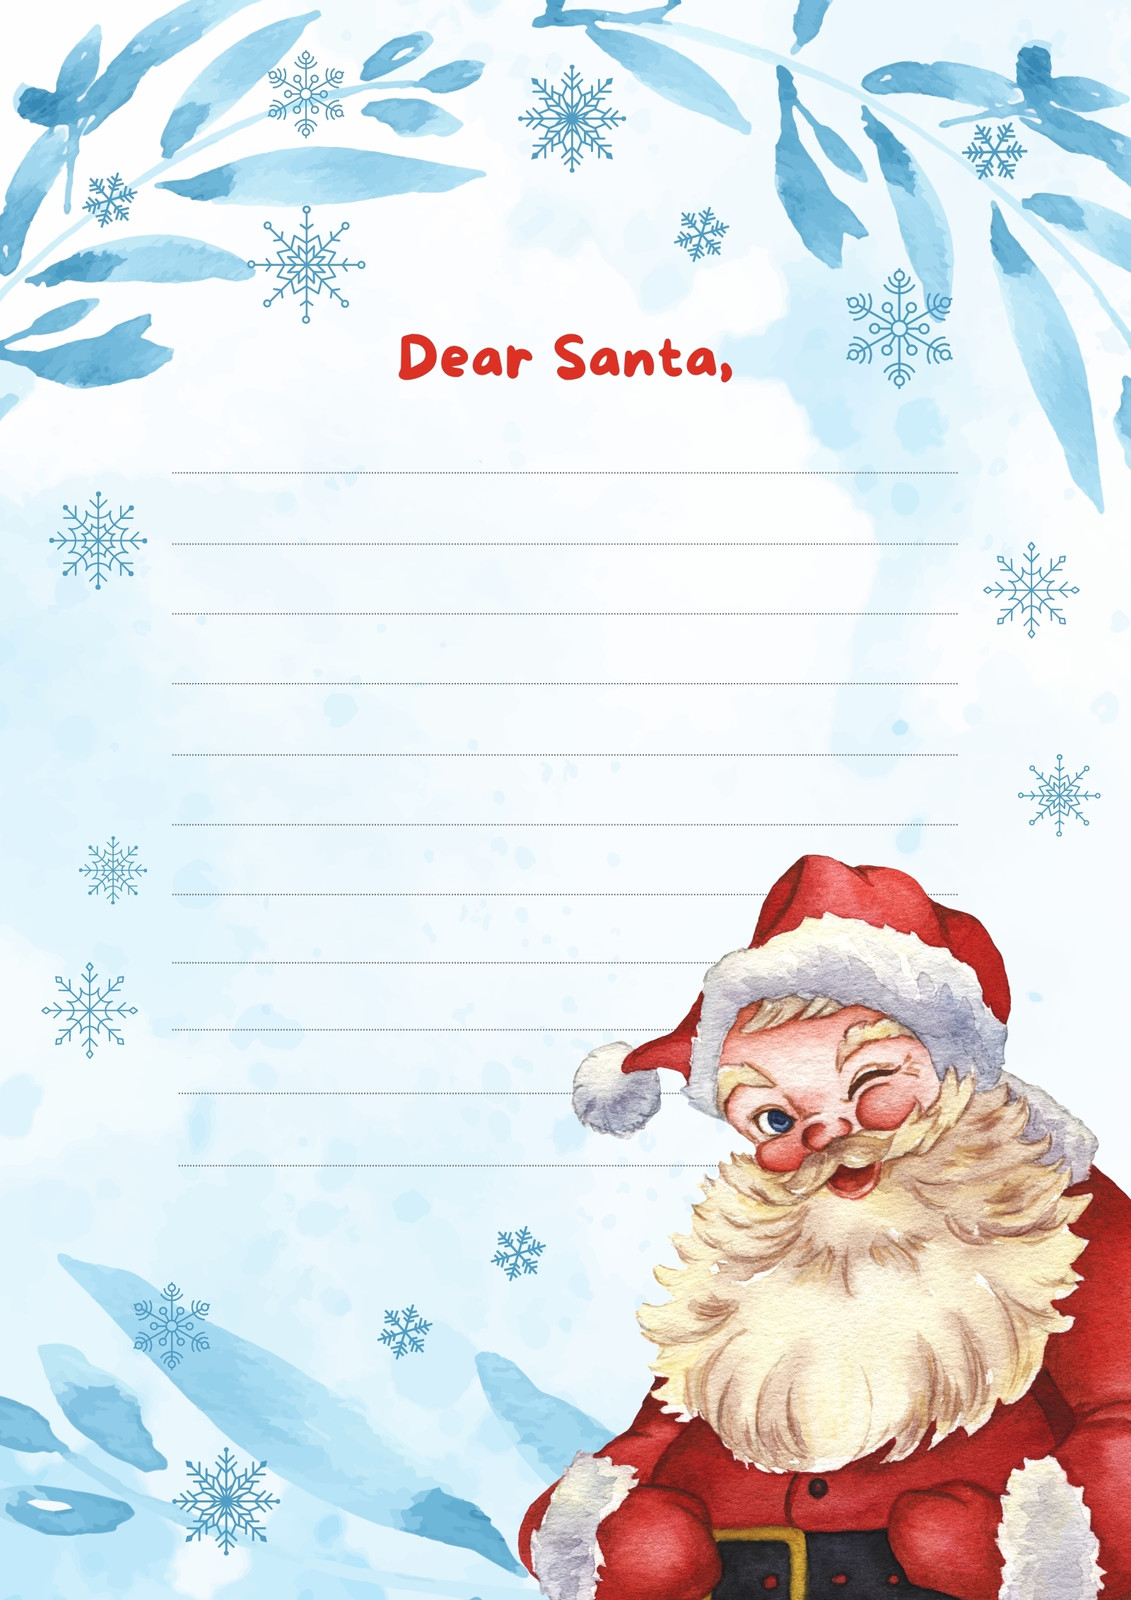 Customize 144+ Christmas Letter Templates Online - Canva